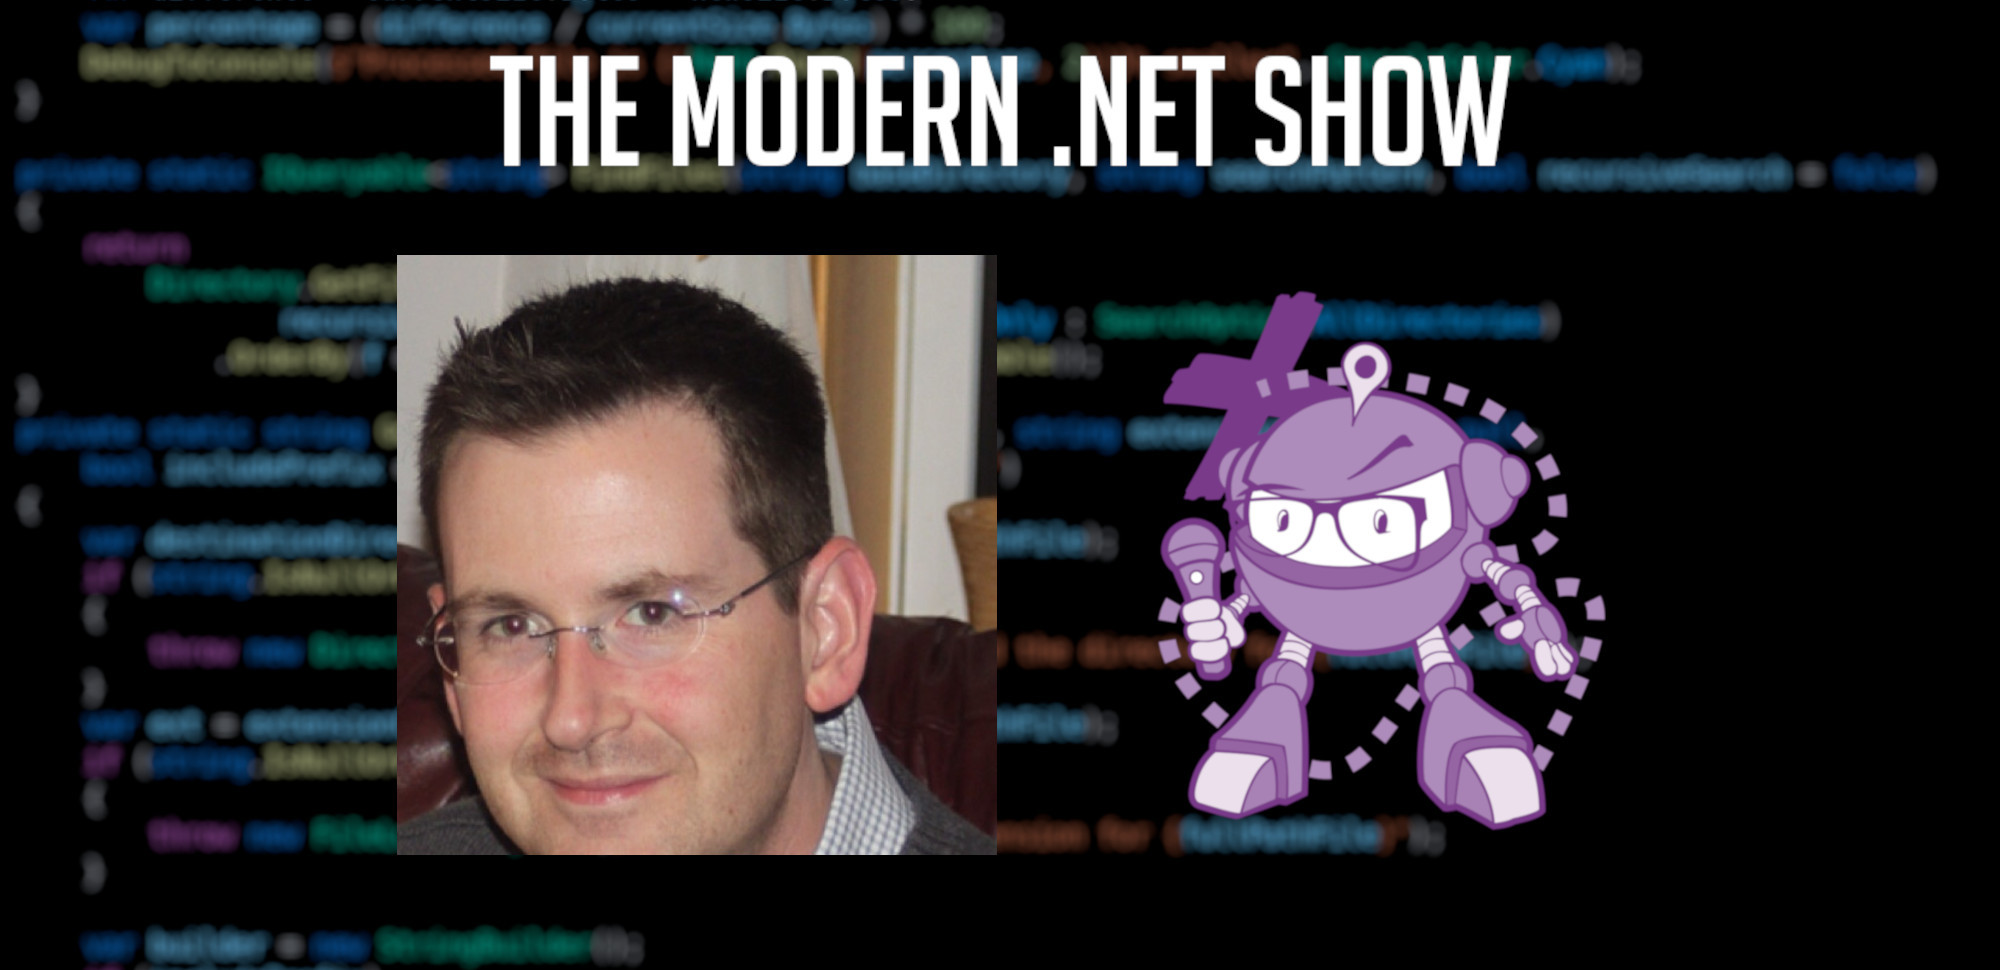 A blurry image of source code, too blurry to read, take the place of the background. Layered over that are the headshot of Josh Garverick and a purple robot holding a microphone; these are on either side of the centre of the image. Above both is the heading 'THE MODERN .NET SHOW' in bold, white text.